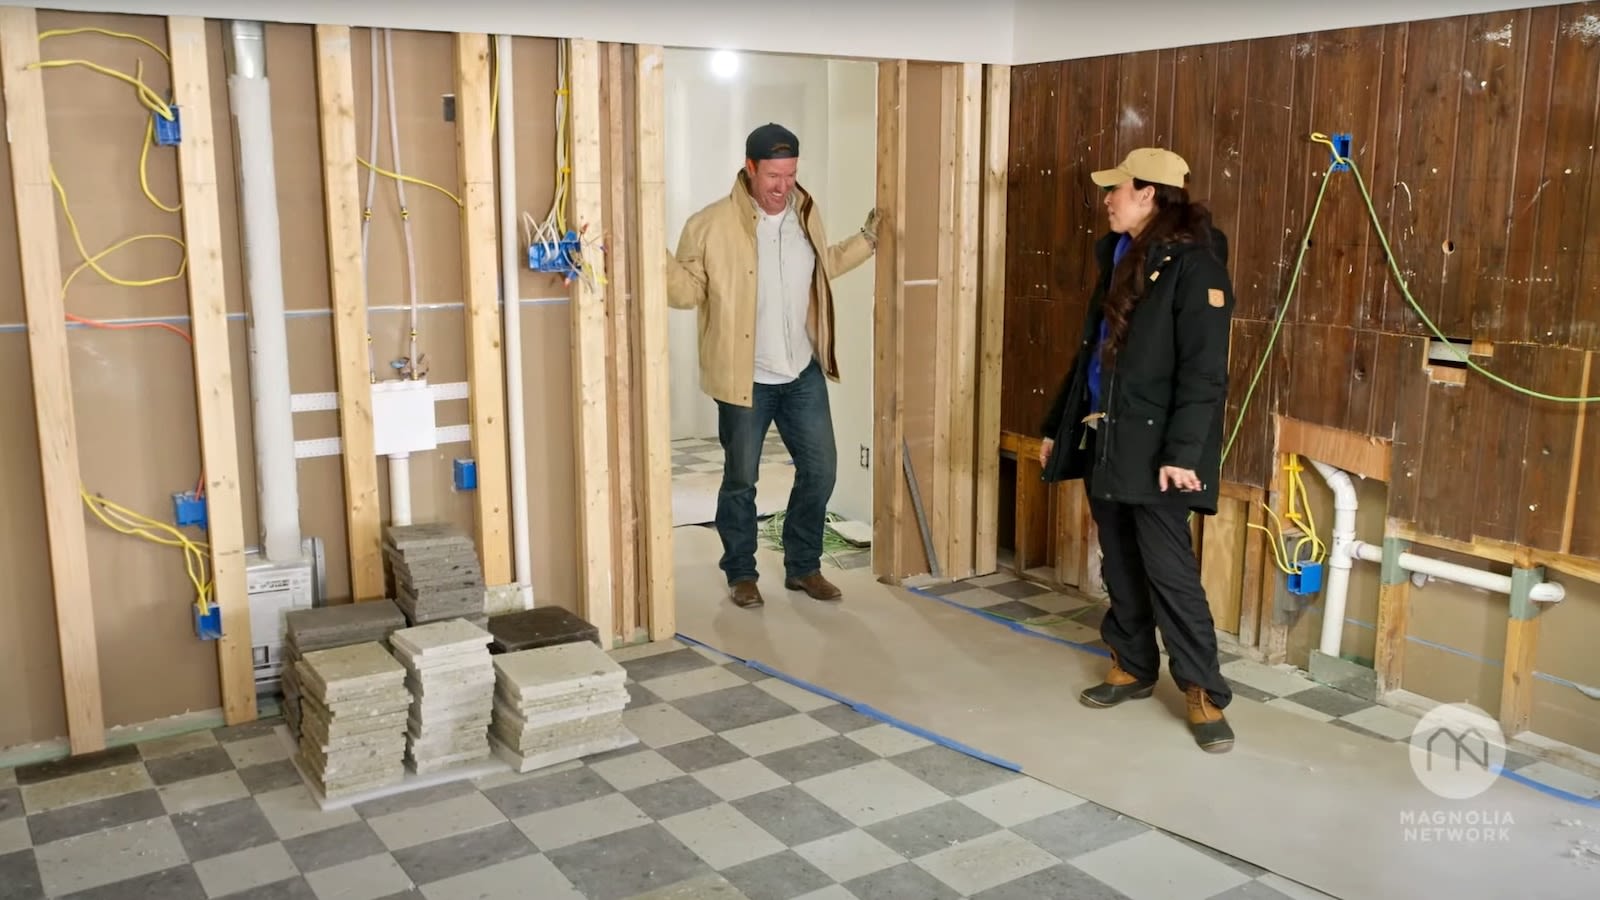 Chip and Joanna Gaines tackle new home renovation in 'Fixer Upper: The Lakehouse': See trailer